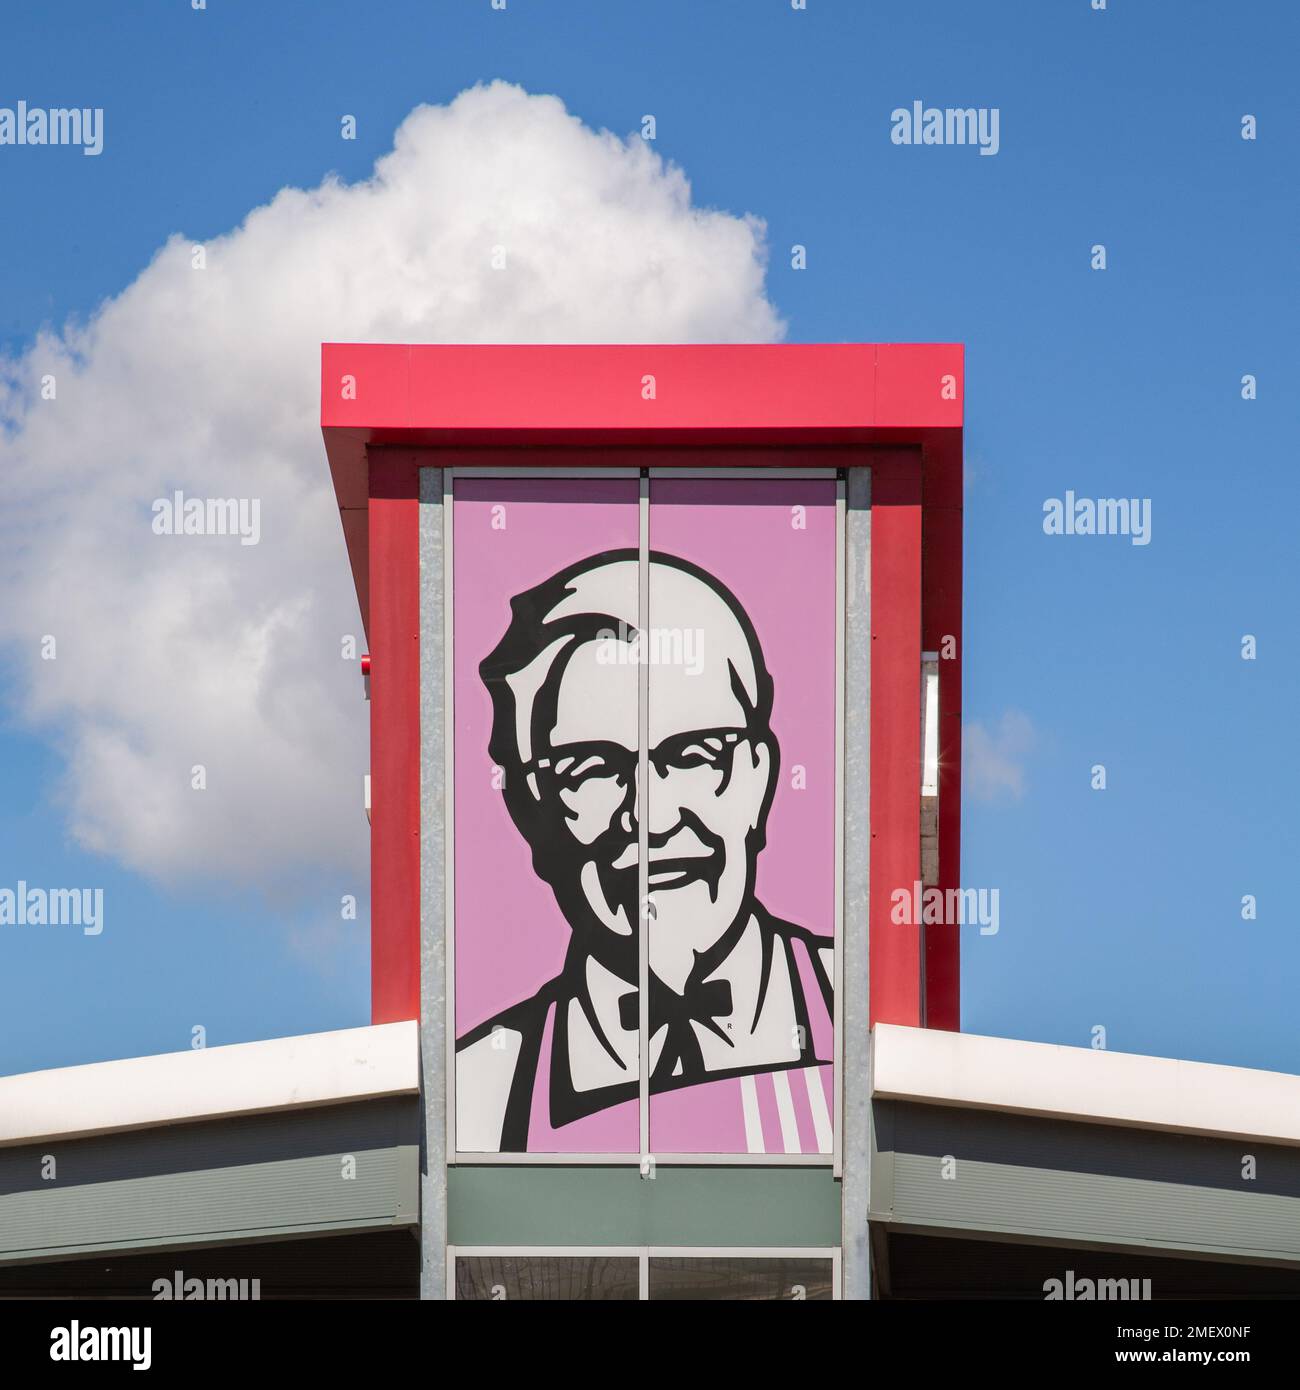 Colonel Sanders artwork featured on a KFC fast food restaurant. Kentucky Fried Chicken. Fast food, diet, healthy eating concept. Stock Photo